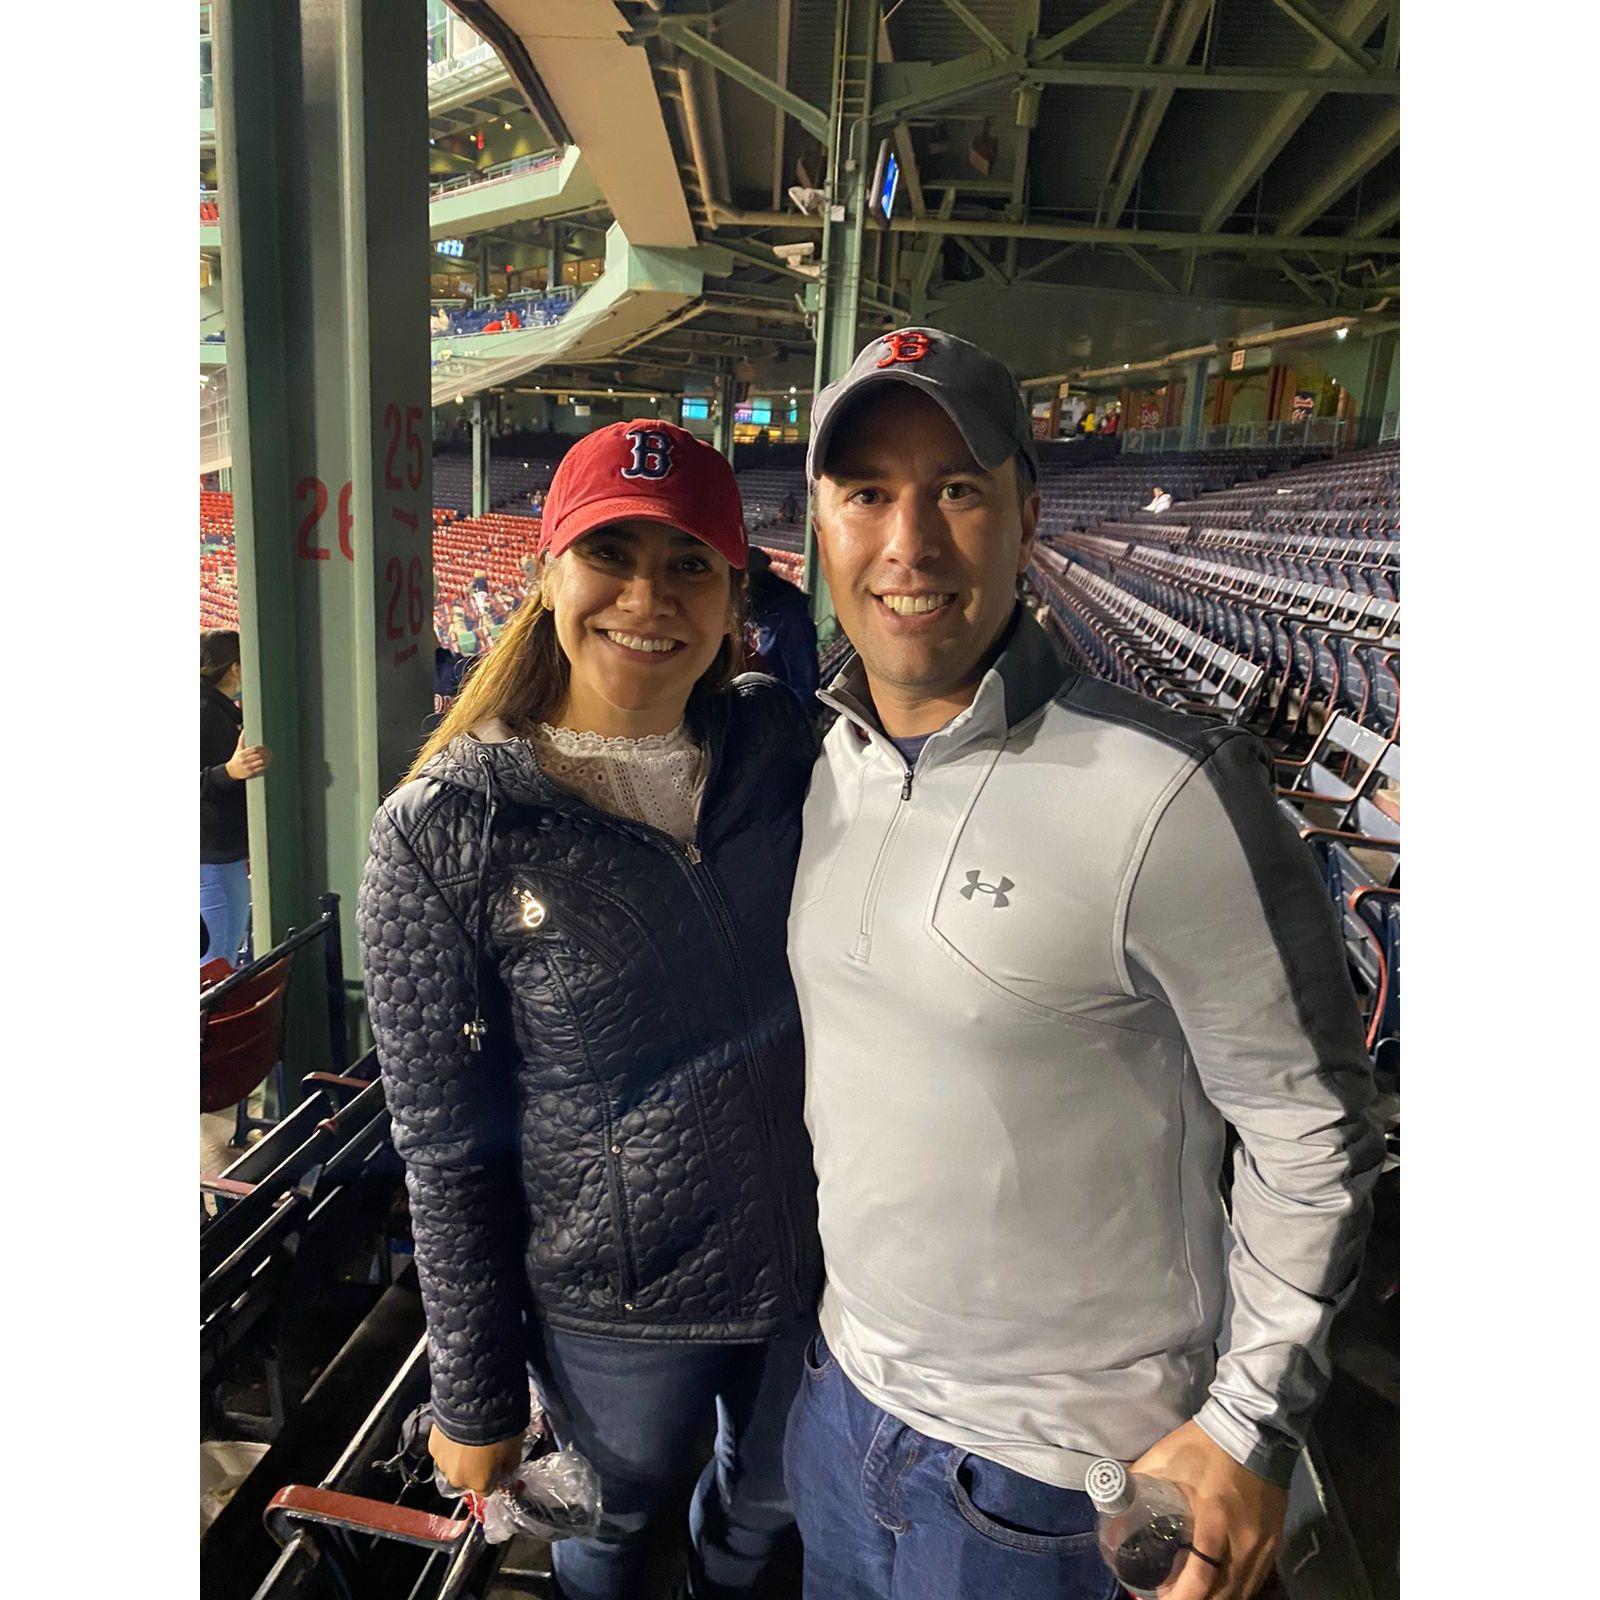 Our first Red Sox game!